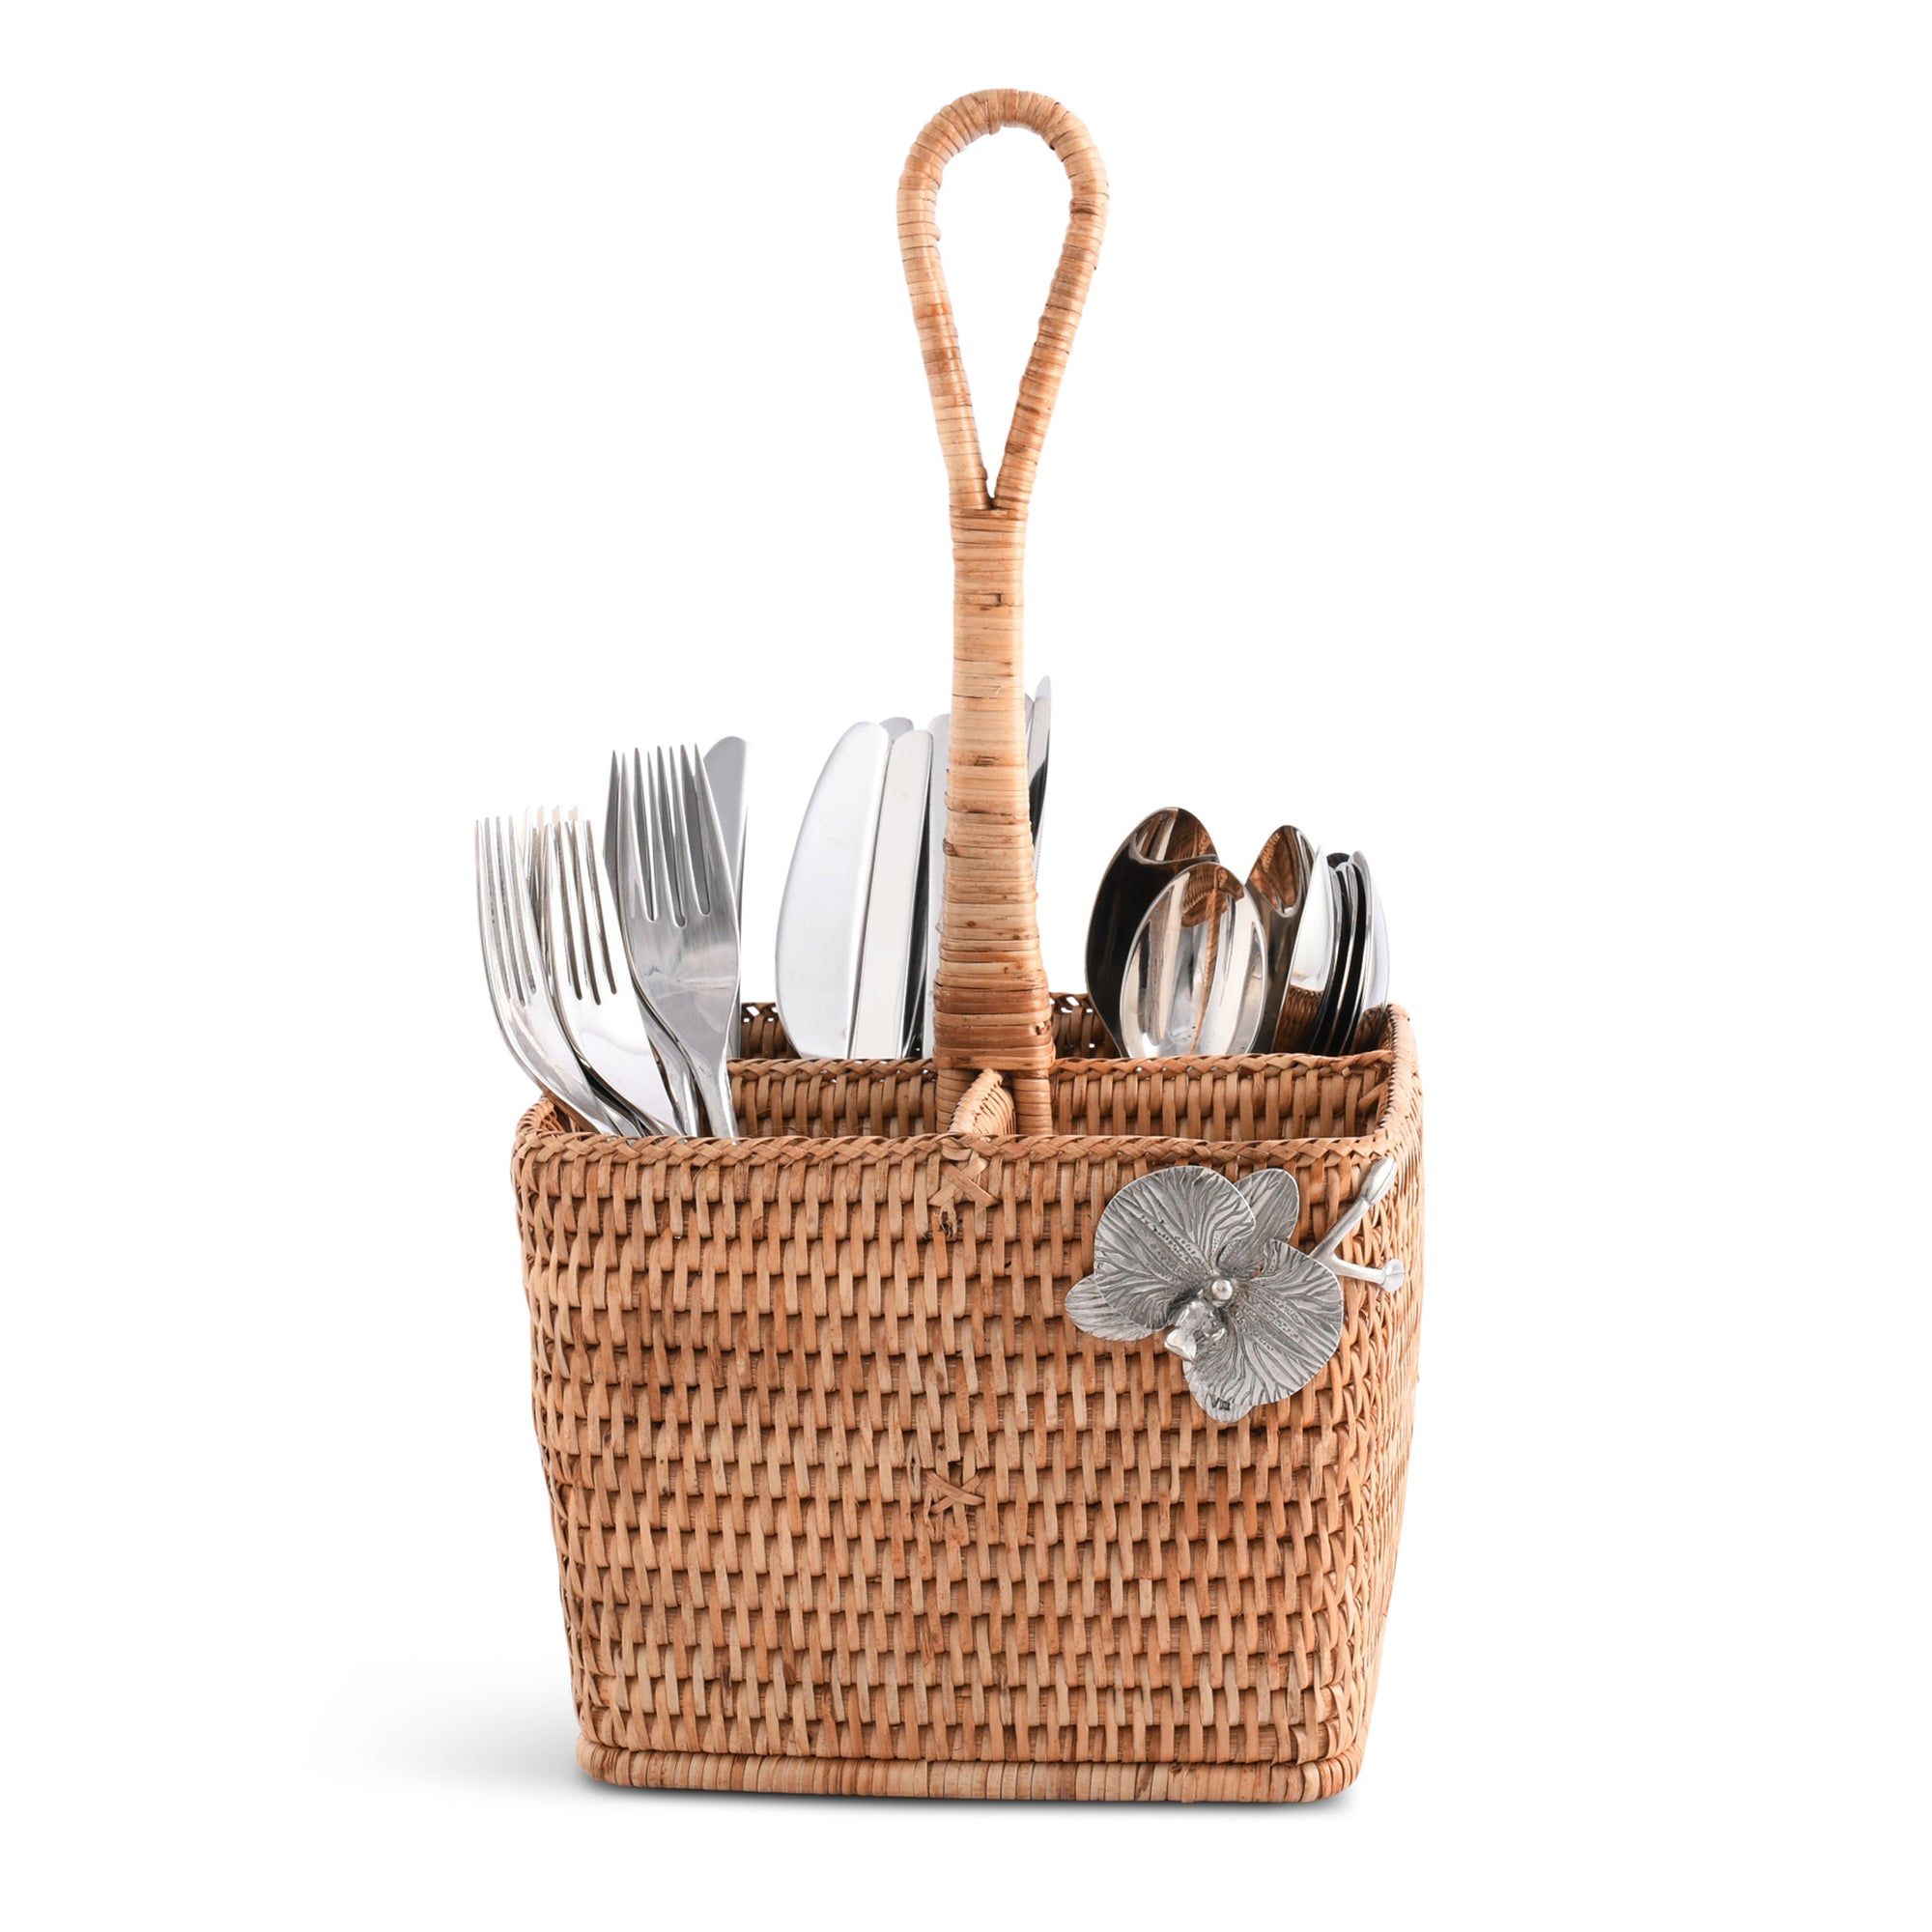 Vagabond House Orchid Hand Woven Wicker Rattan Flatware Caddy Product Image